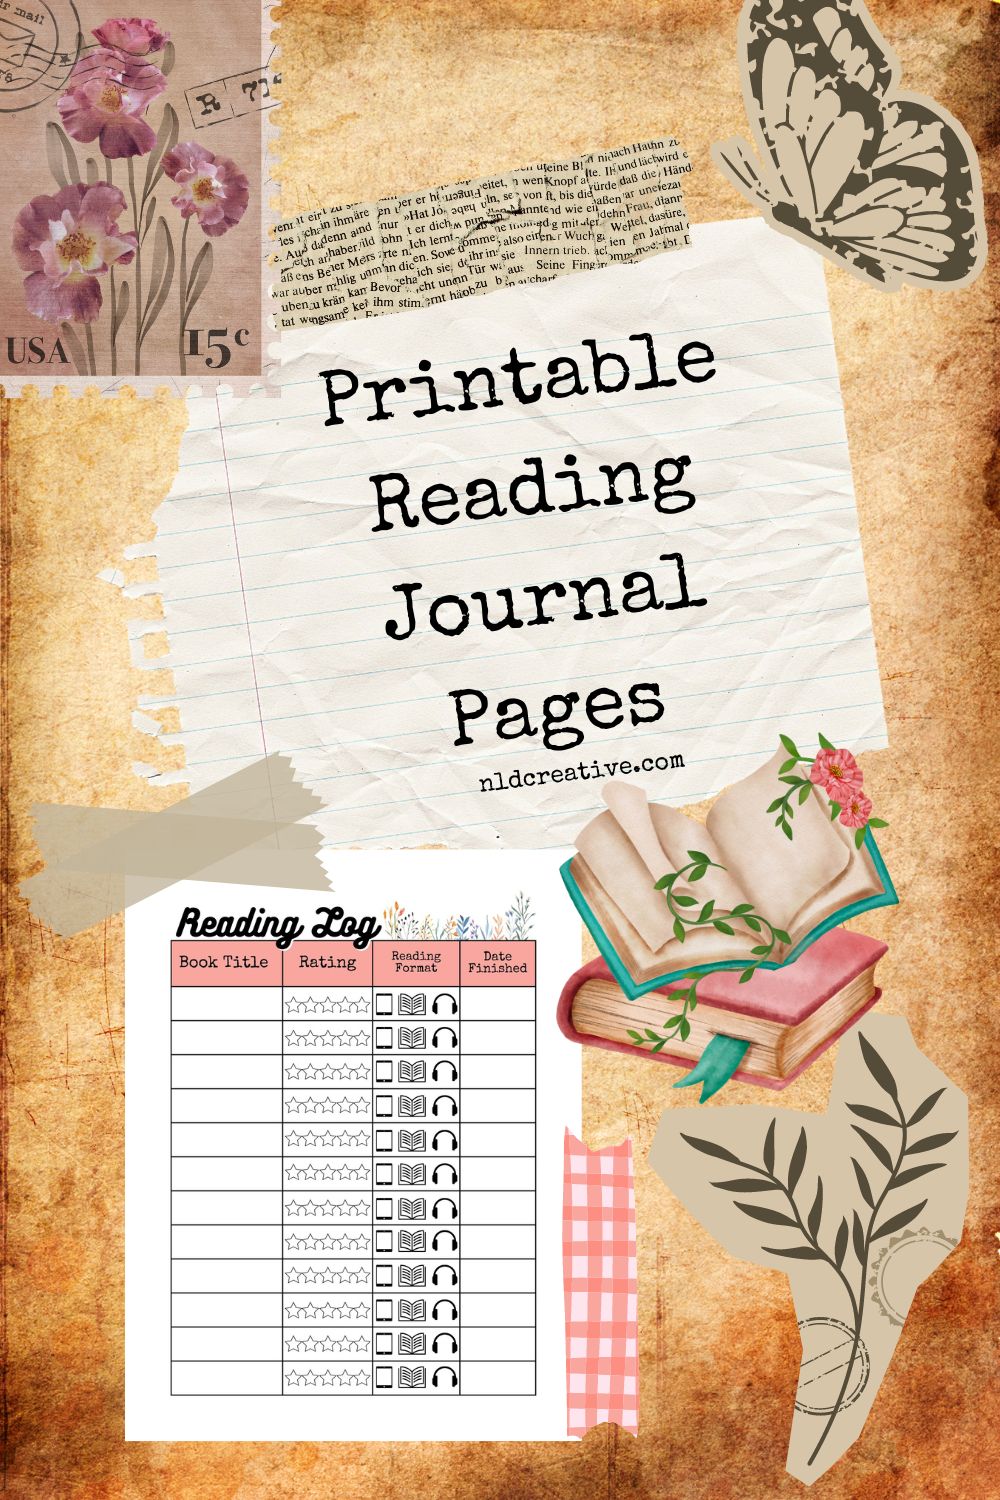 featured image: scrapbook journal page aesthetic with a preview of the book tracker download